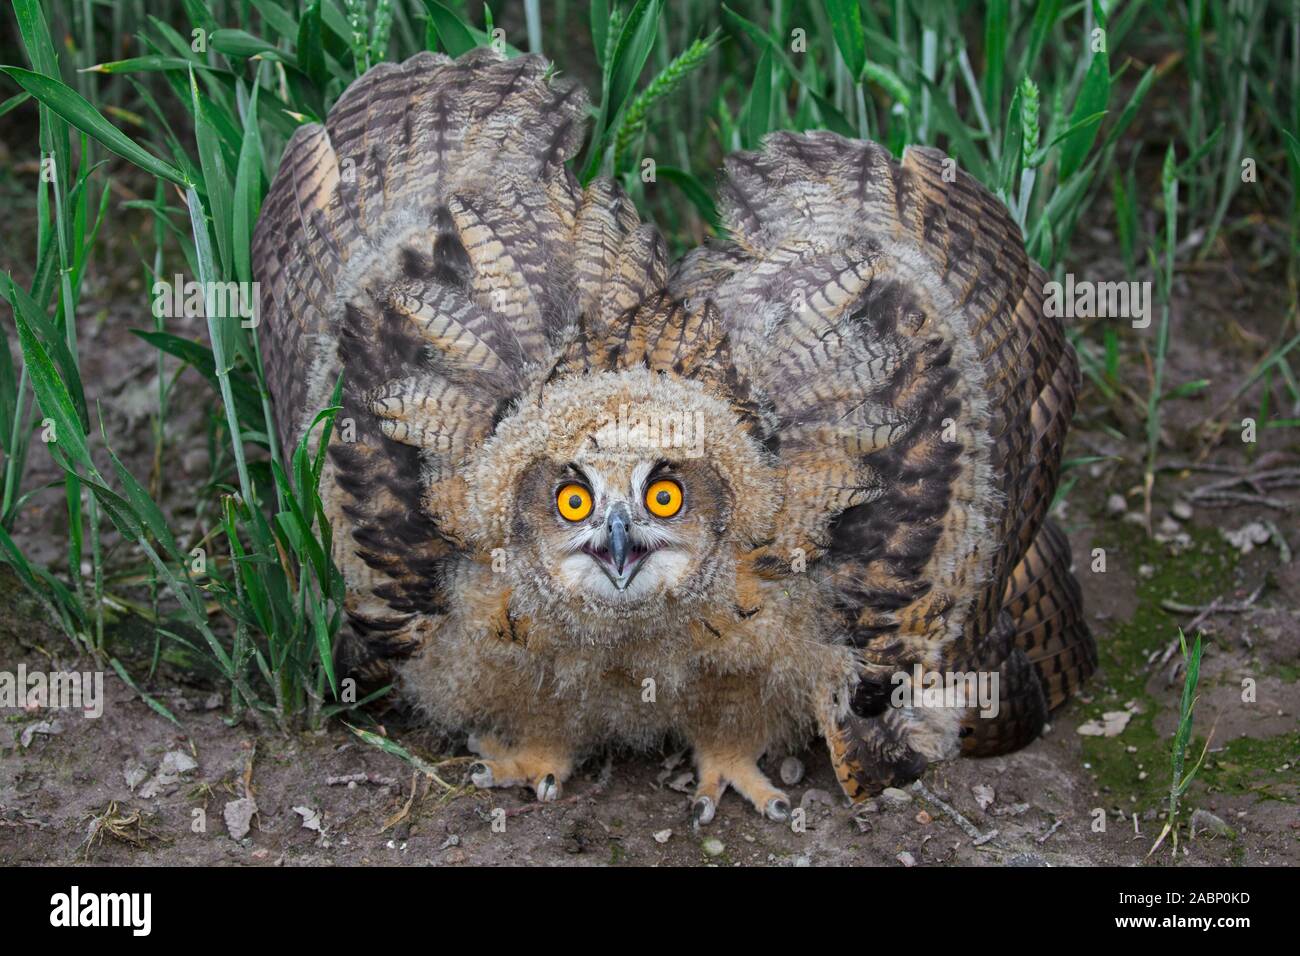 Threat display by Eurasian eagle-owl / young European eagle-owl (Bubo bubo) owlet showing lowered head and wings spread out and pointing down Stock Photo